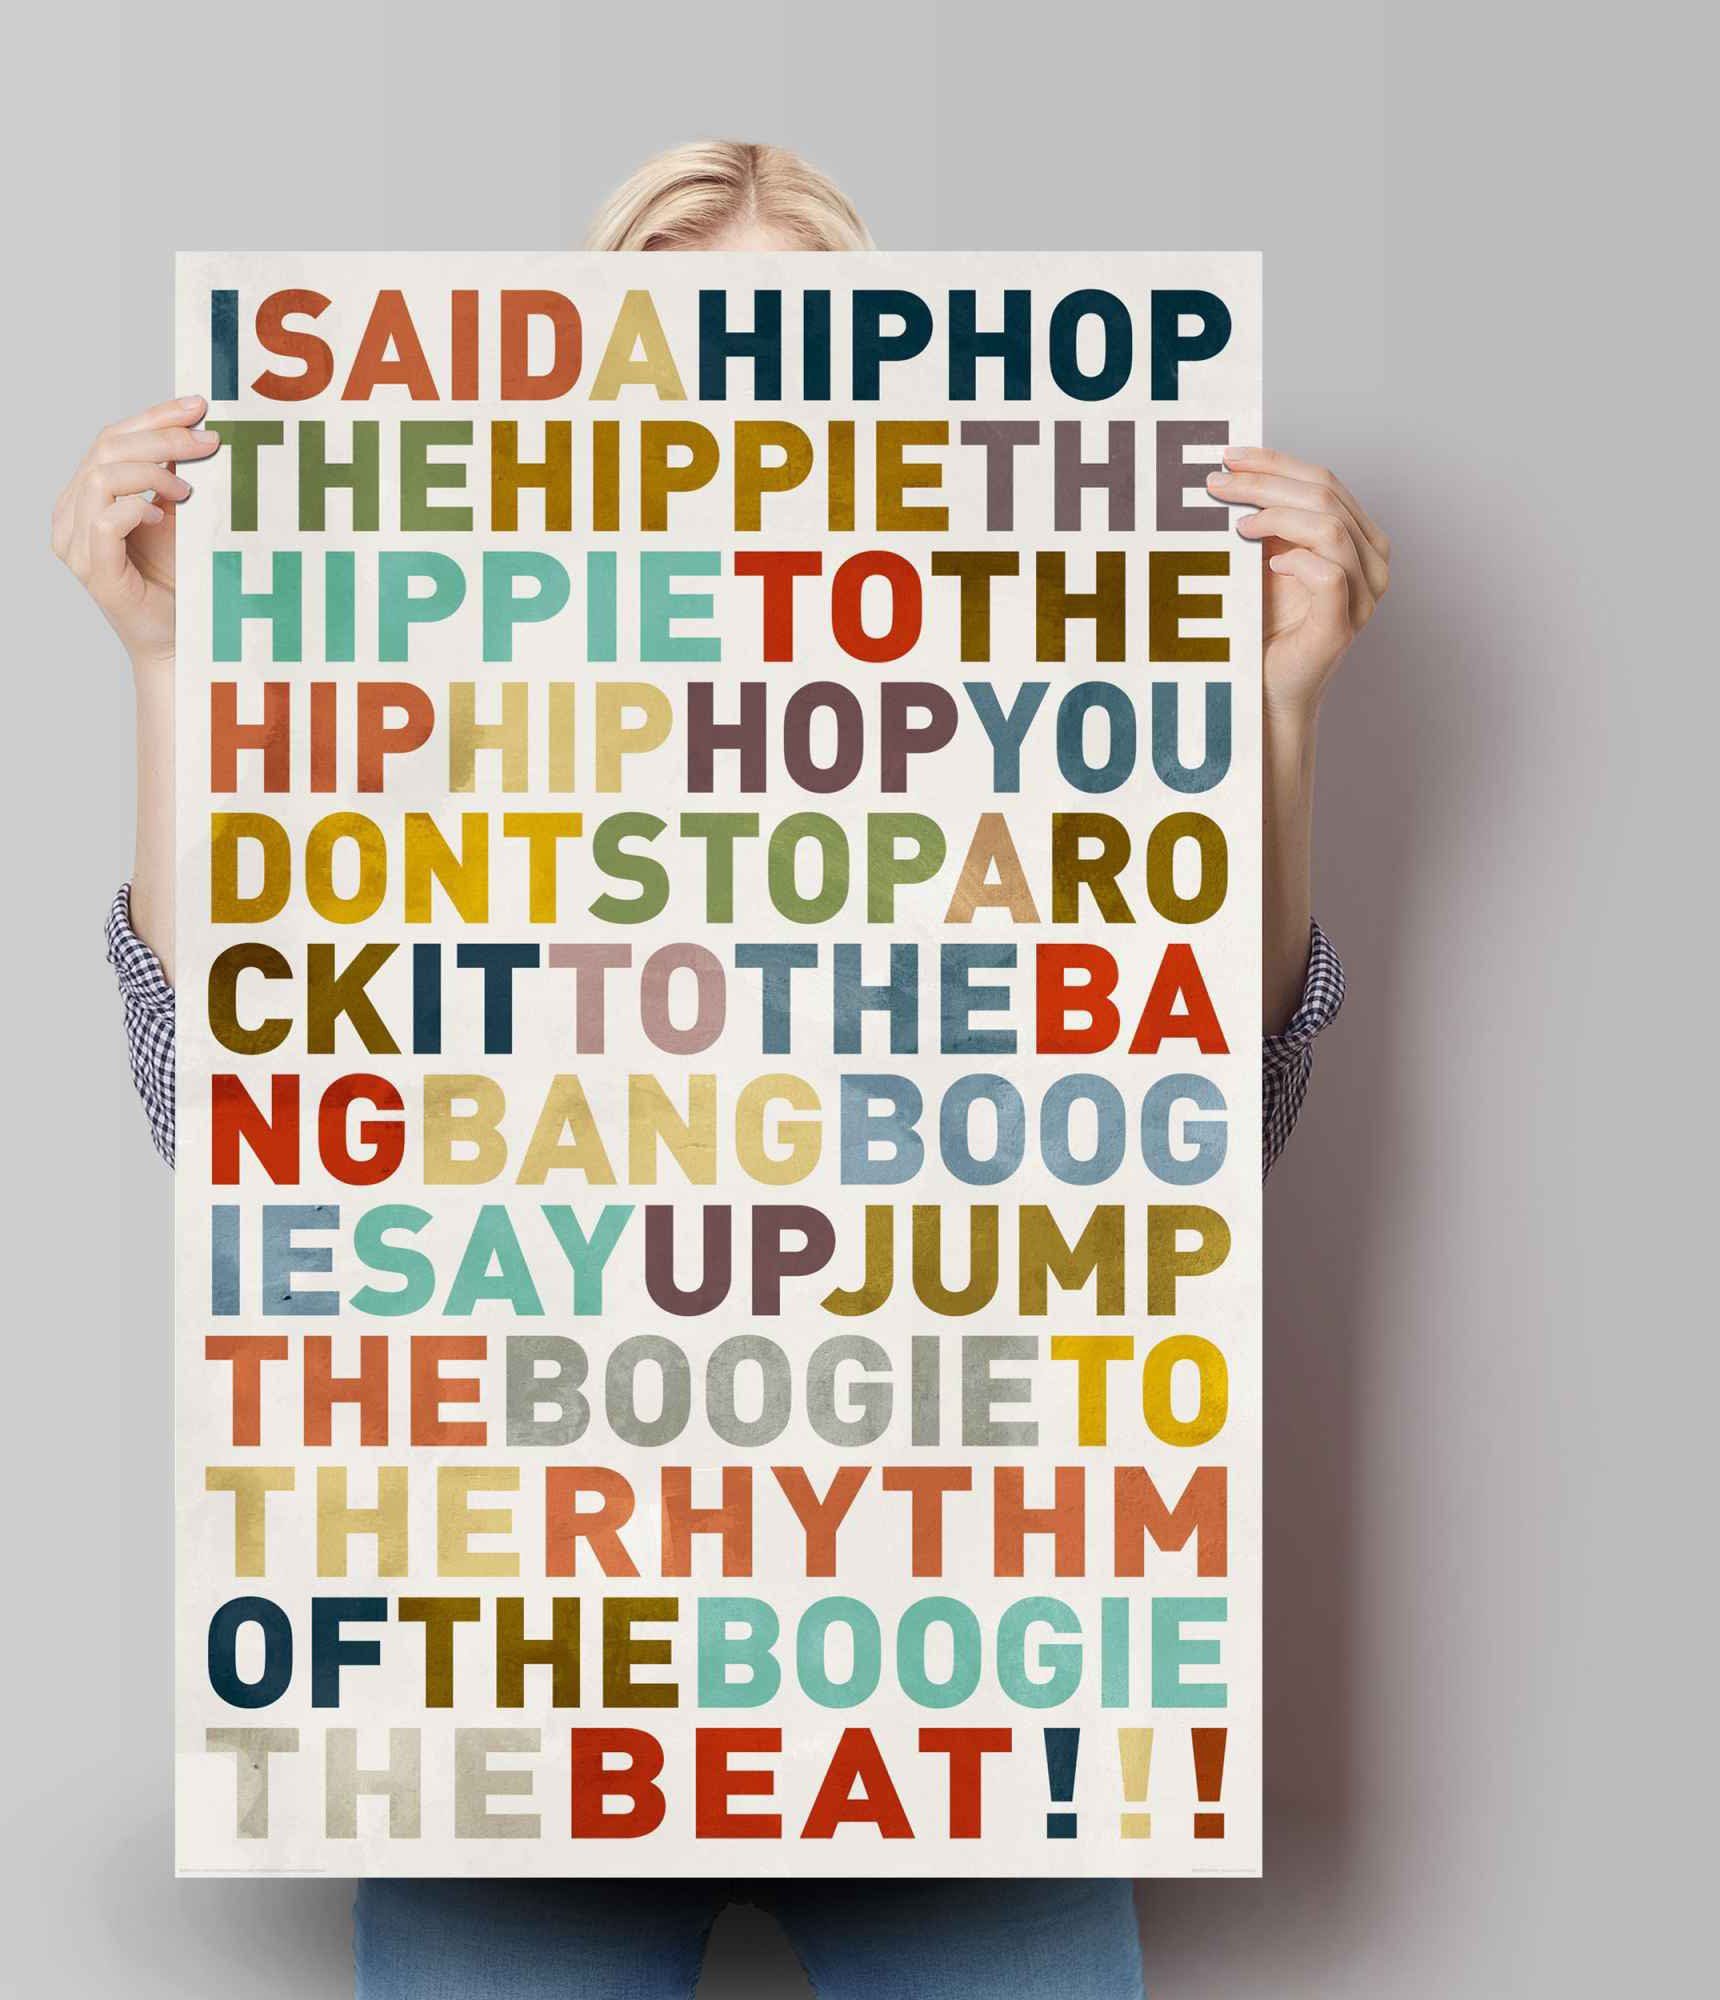 Musik, (1 Poster I Musiker - Farbig Hip-Hop said Reinders! - Poster - St) HipHop a Songtext